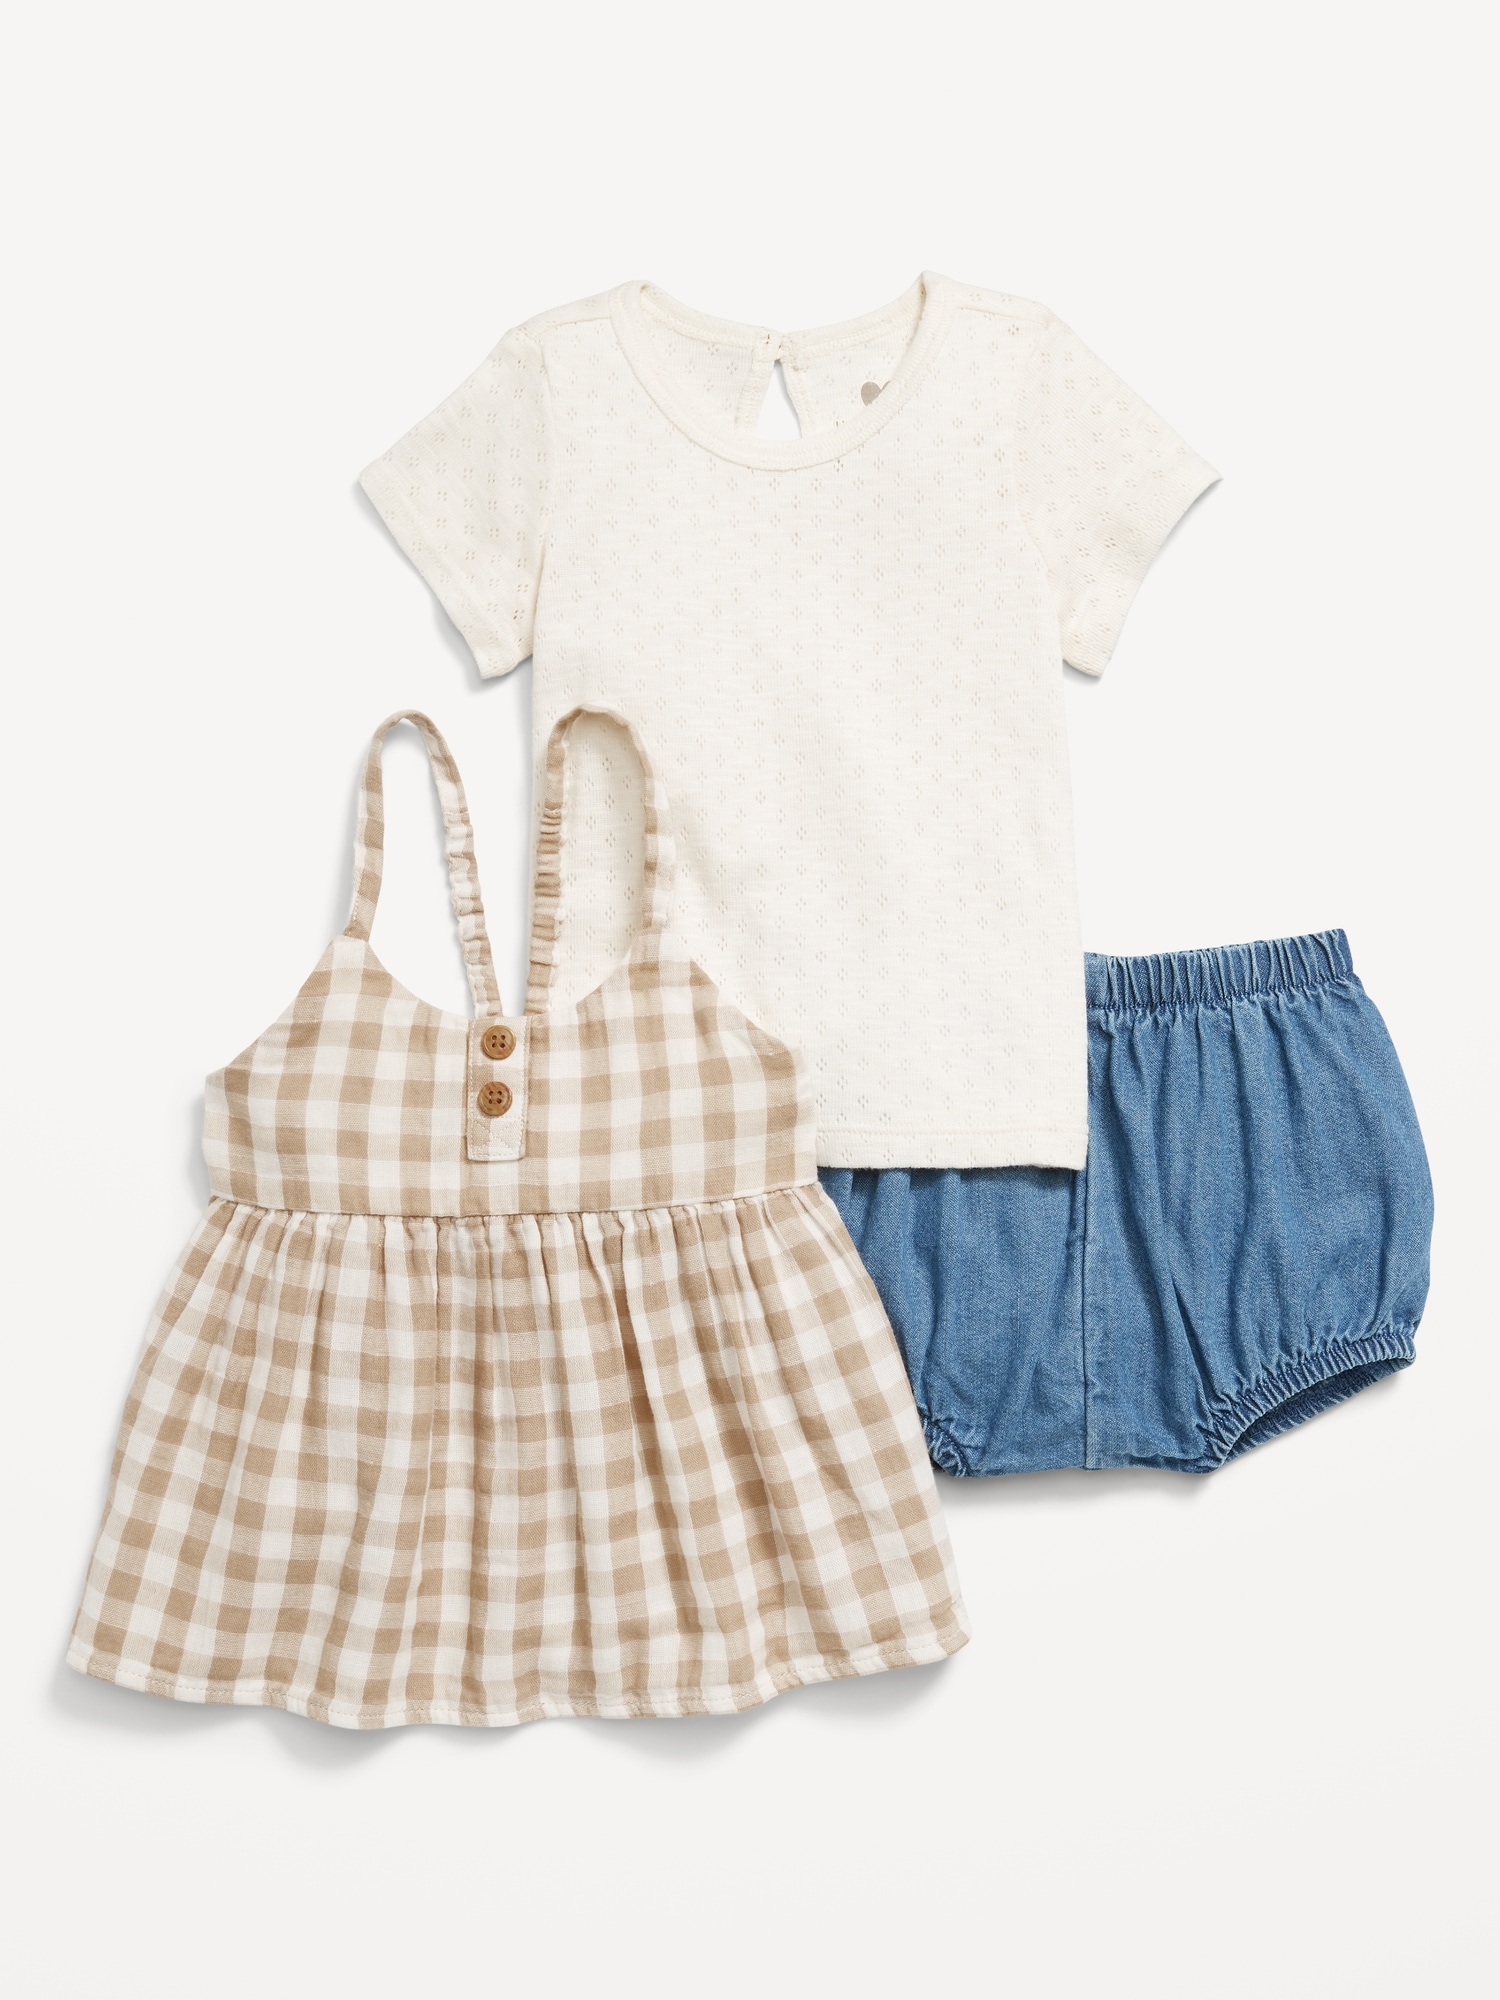 Organic-Cotton Dress, T-Shirt and Bloomer Shorts 3-Piece for Baby